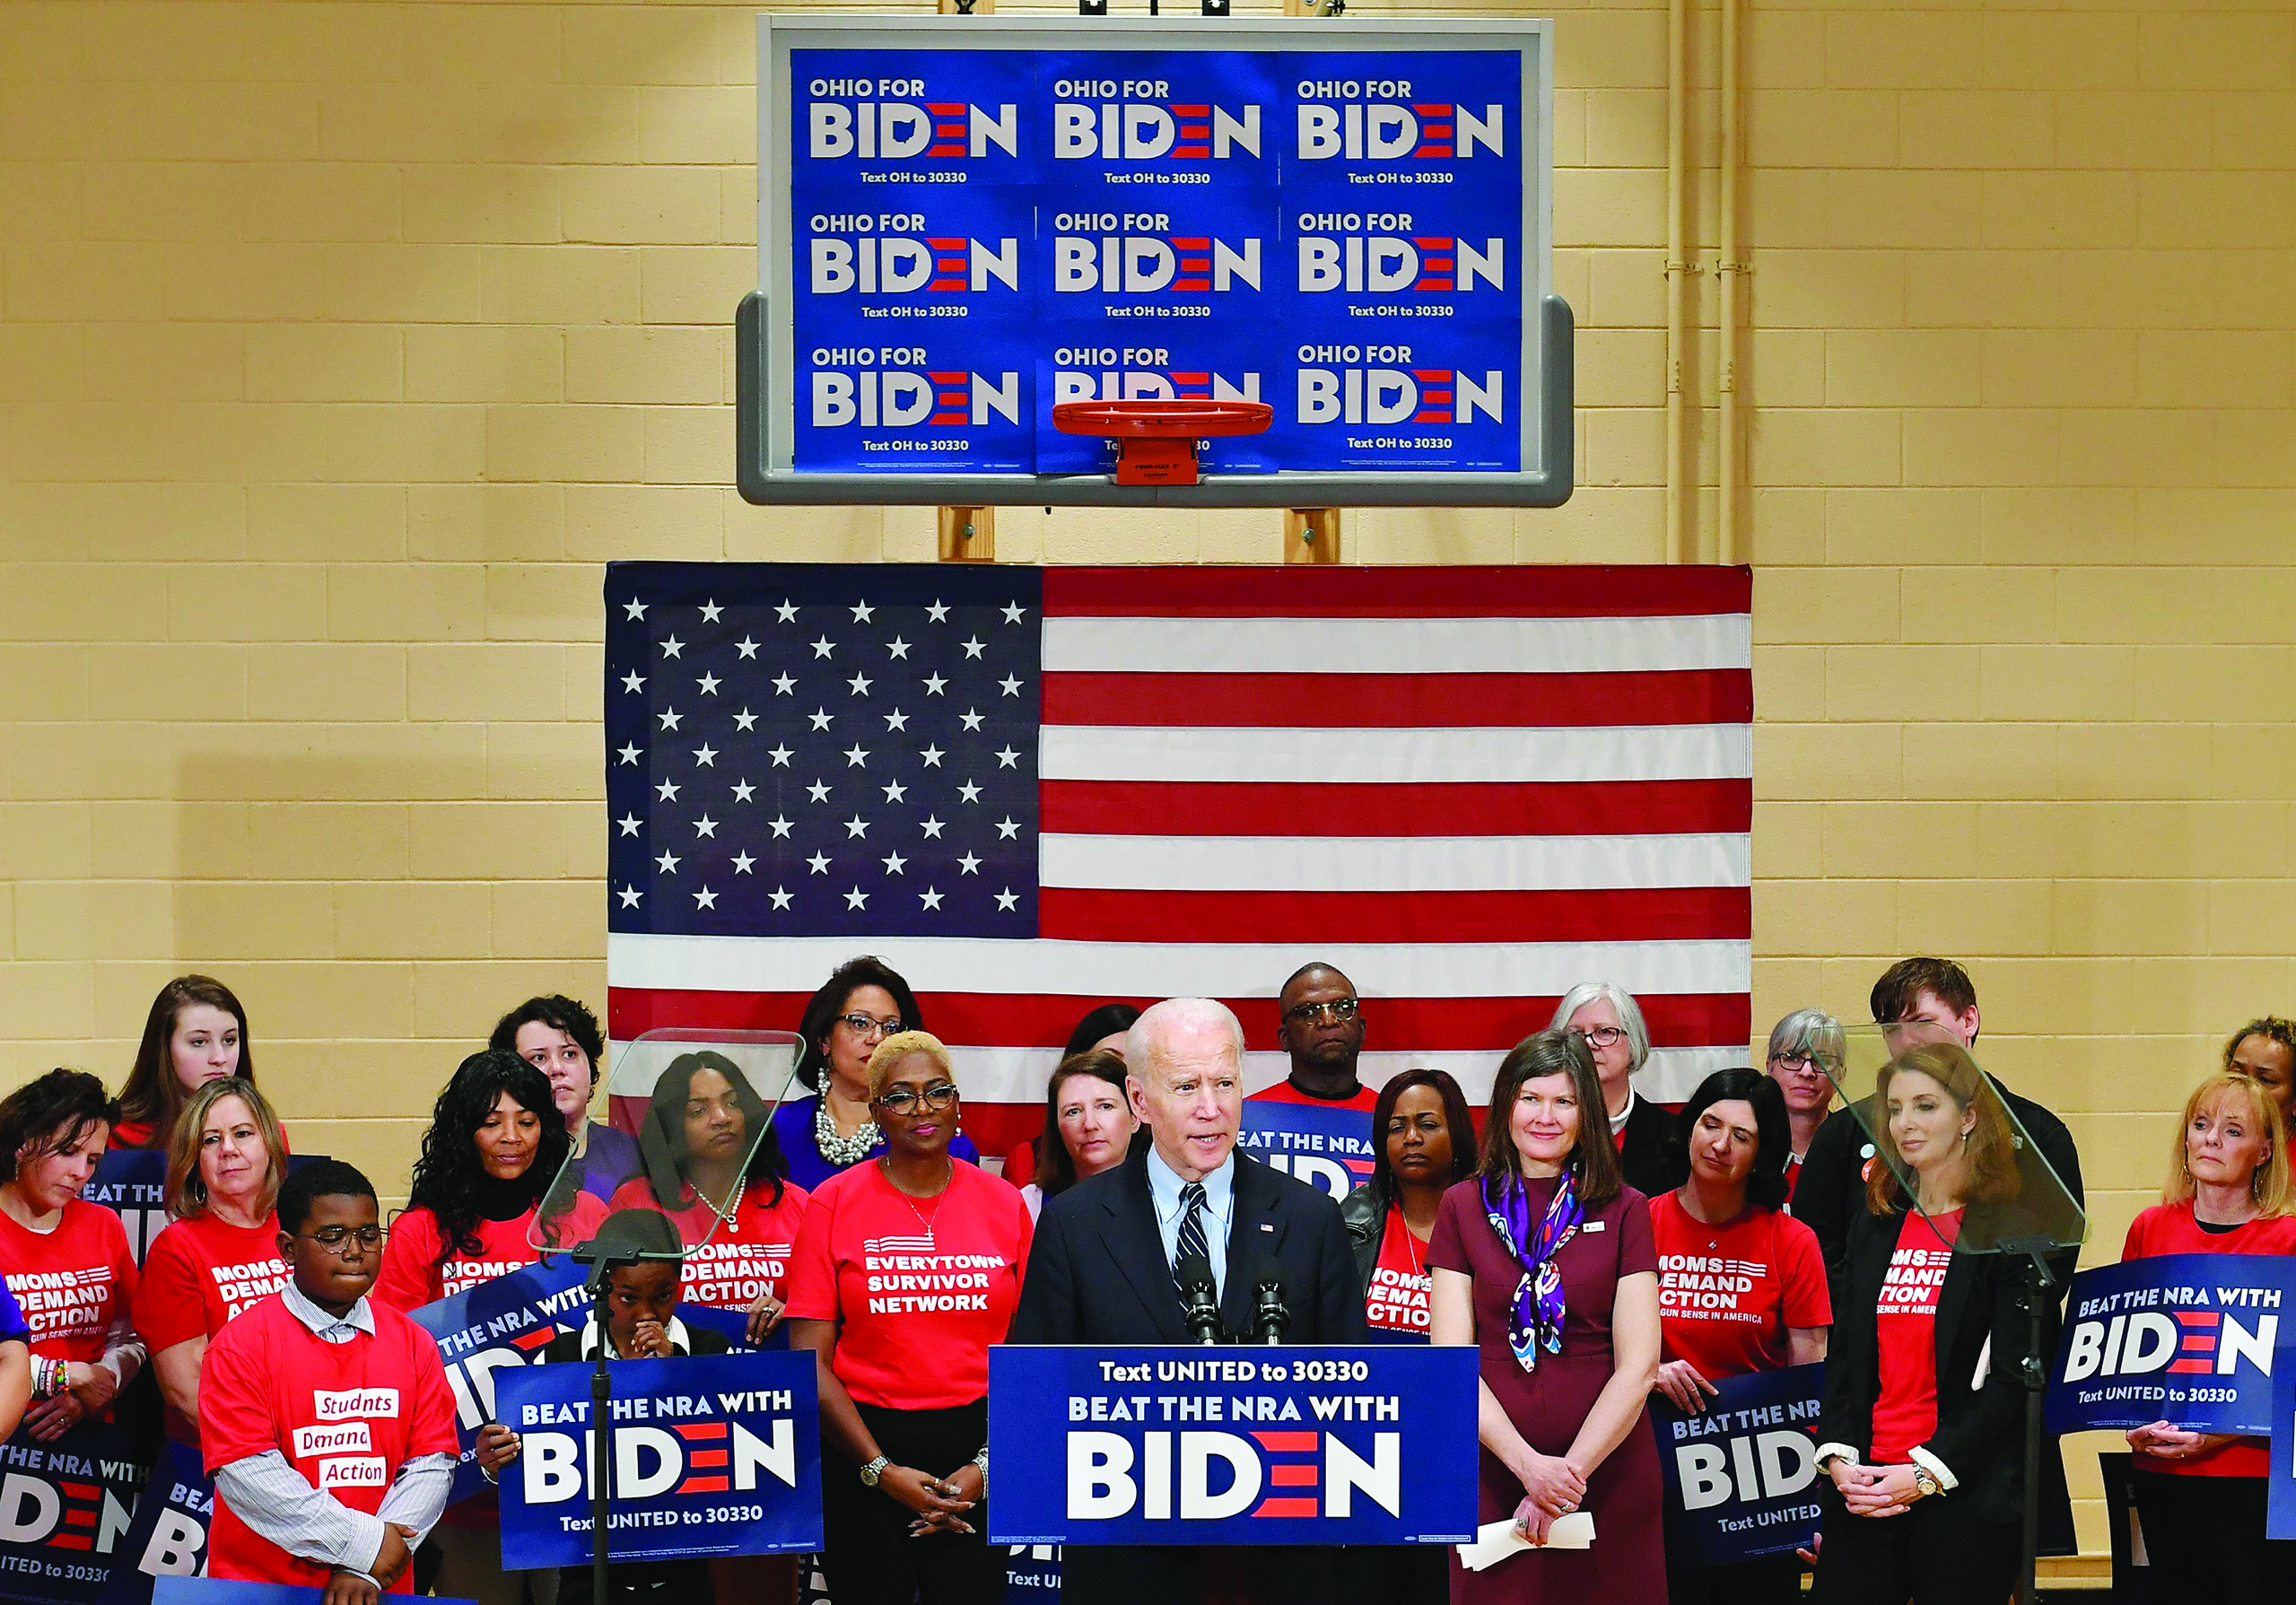 TOPSHOT - Democratic presidential candidate Joe Biden speaks during a campaign stop at Driving Park Community Center in Columbus, Ohio on March 10, 2020. (Photo by MANDEL NGAN / AFP)